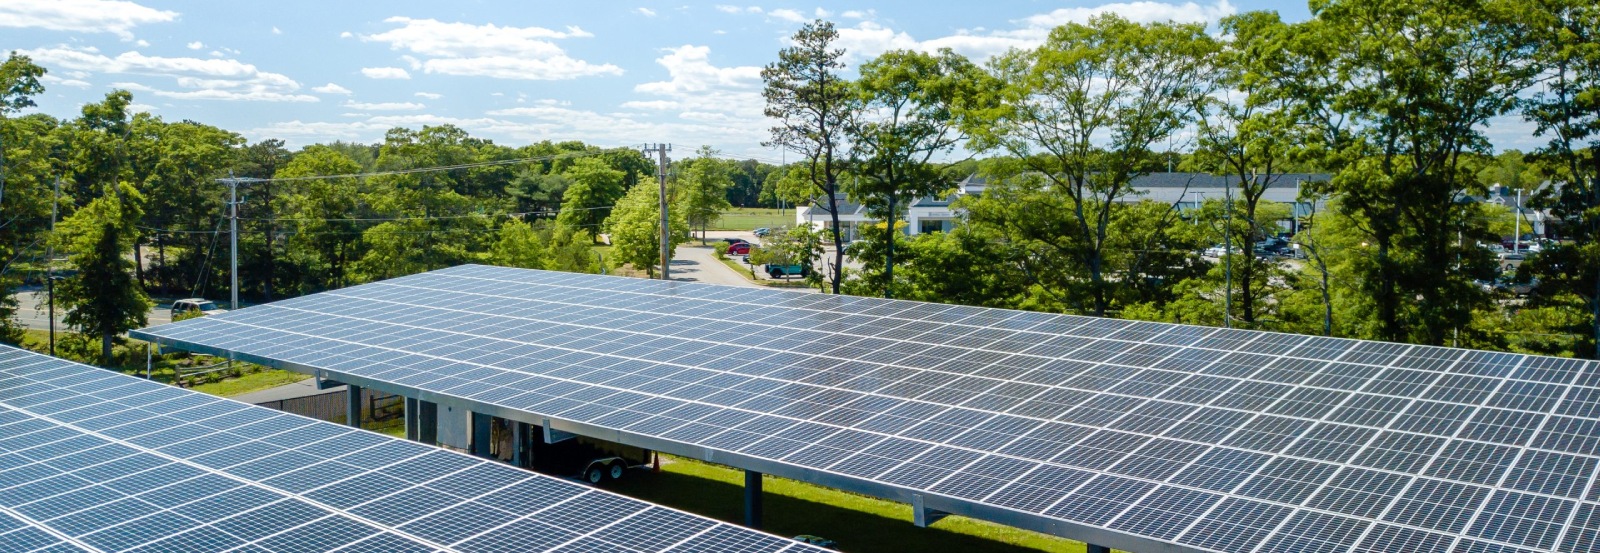 AT&T Signs Agreement for 15.5 MW of Community Solar Power in New York